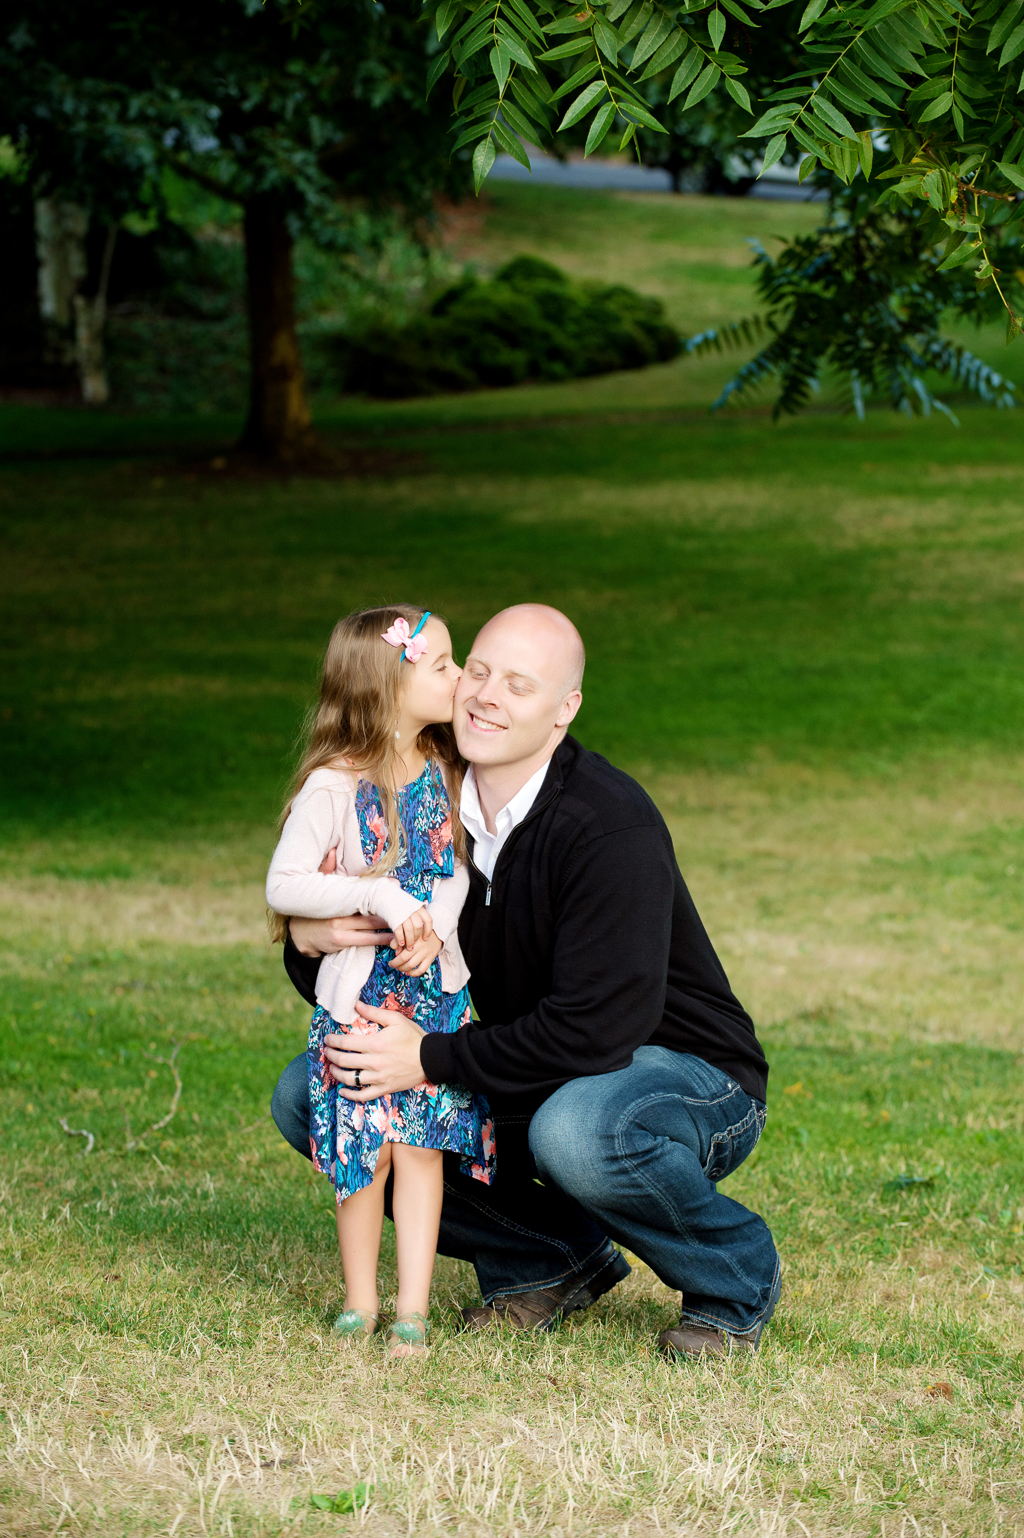 a little girl gives her dad a kiss on the cheek